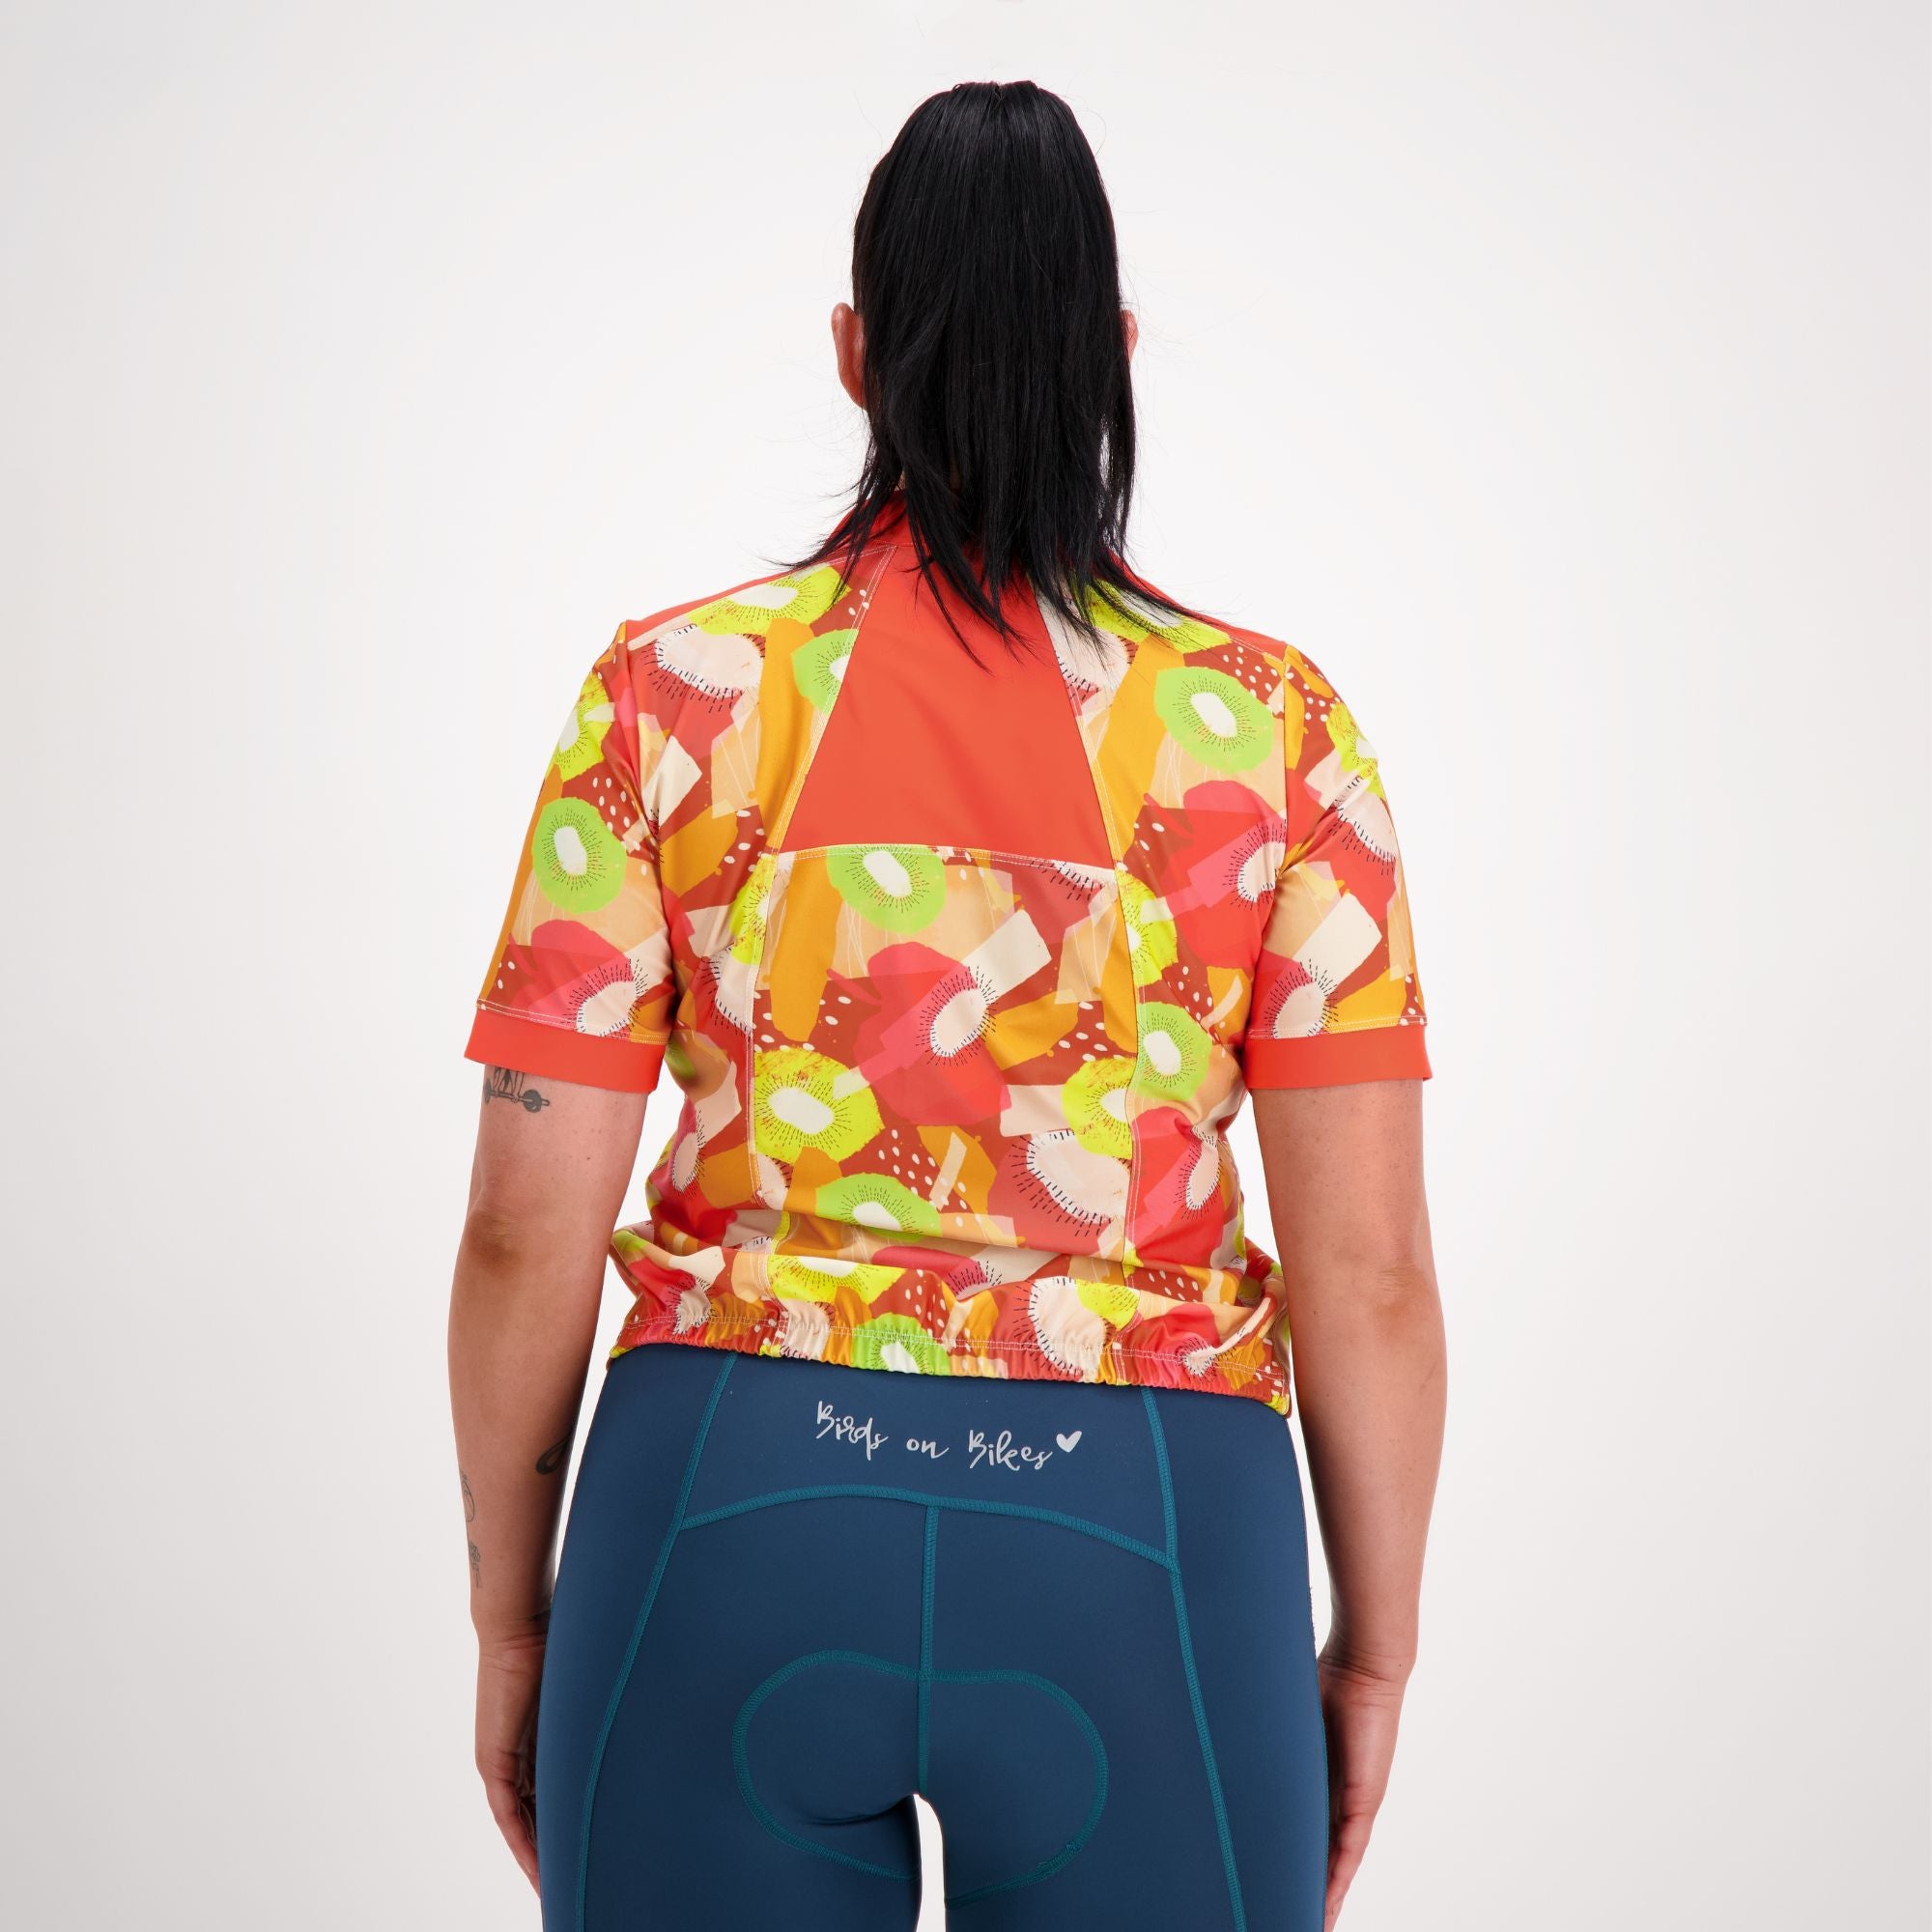 Back view of model wearing Carefree Cycling Jersey in Tutti Fruity orange print